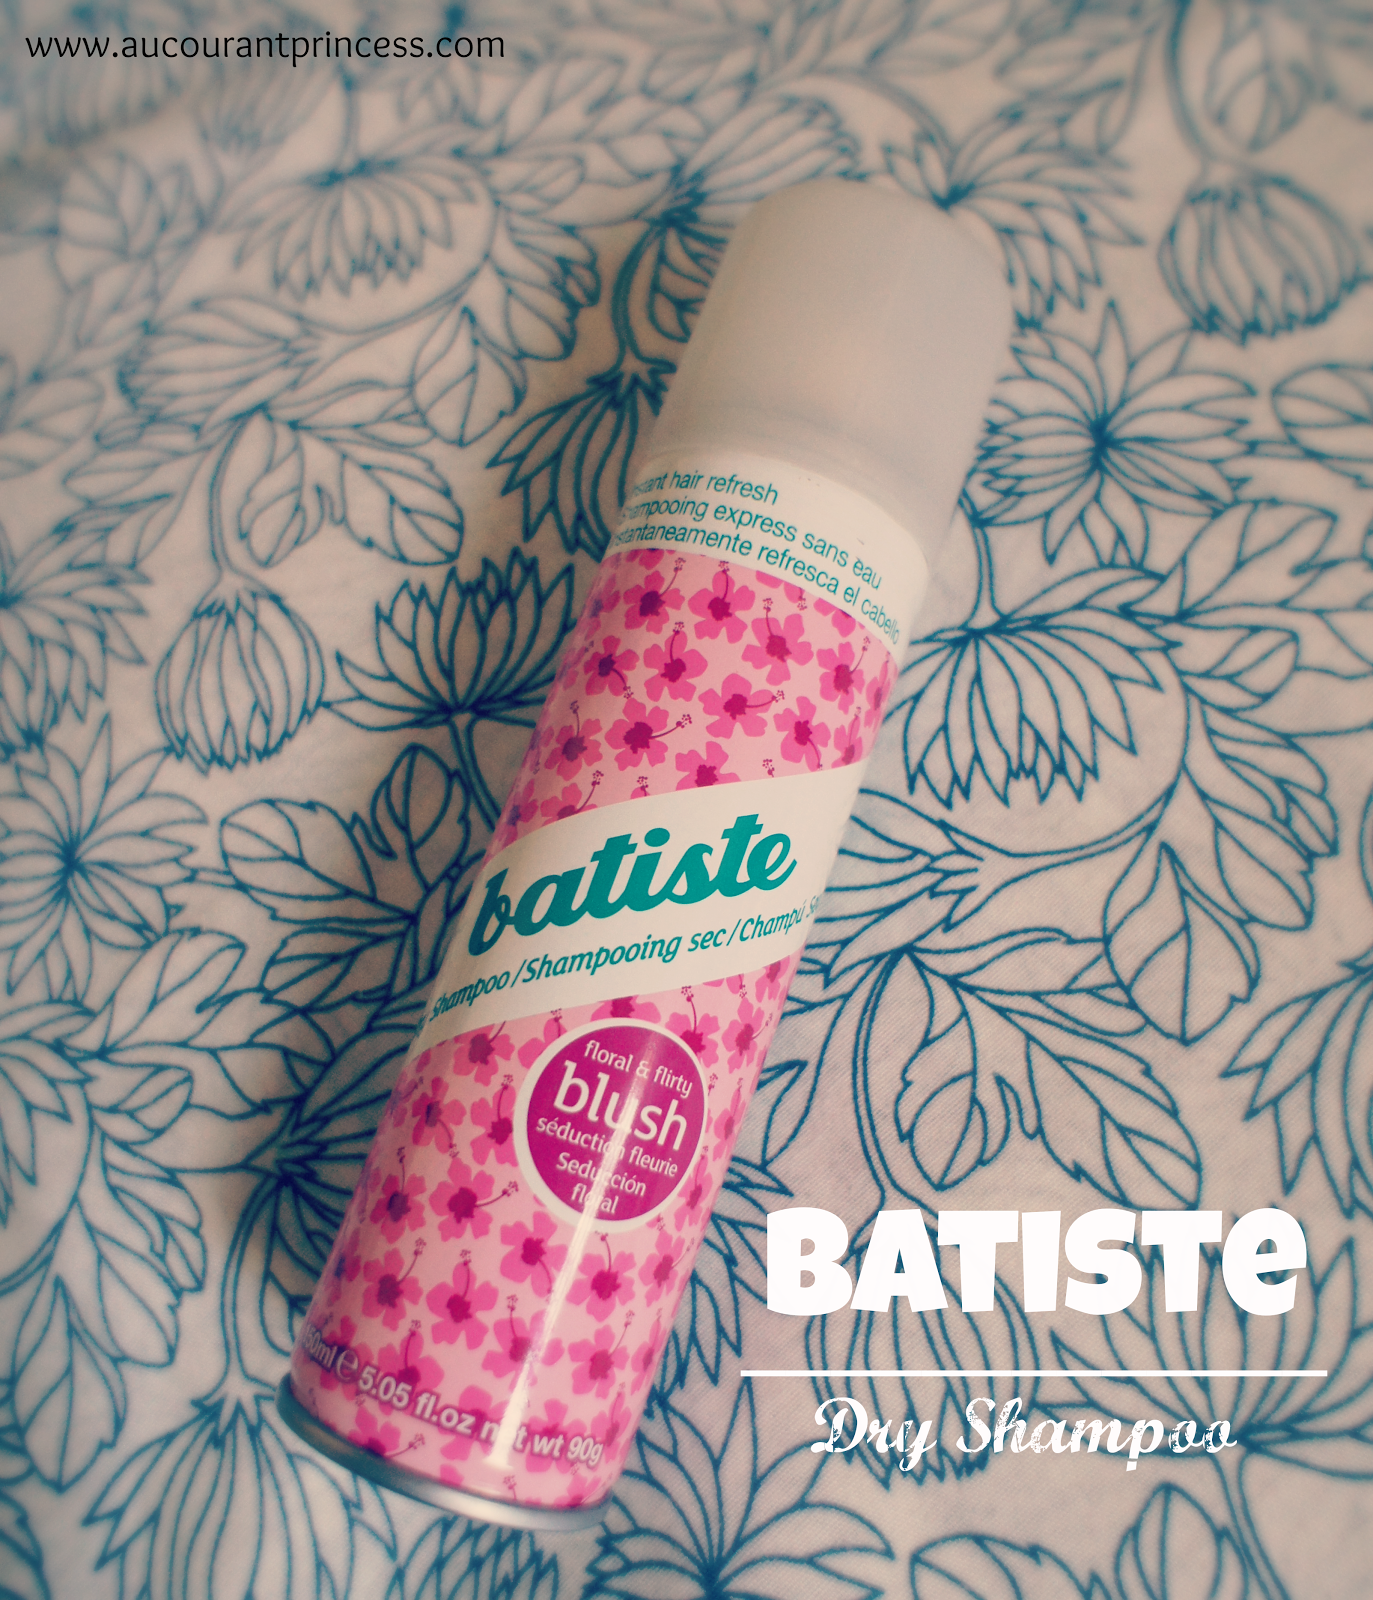 Batiste Dry Shampoo in Floral and Flirty Blush Product Review